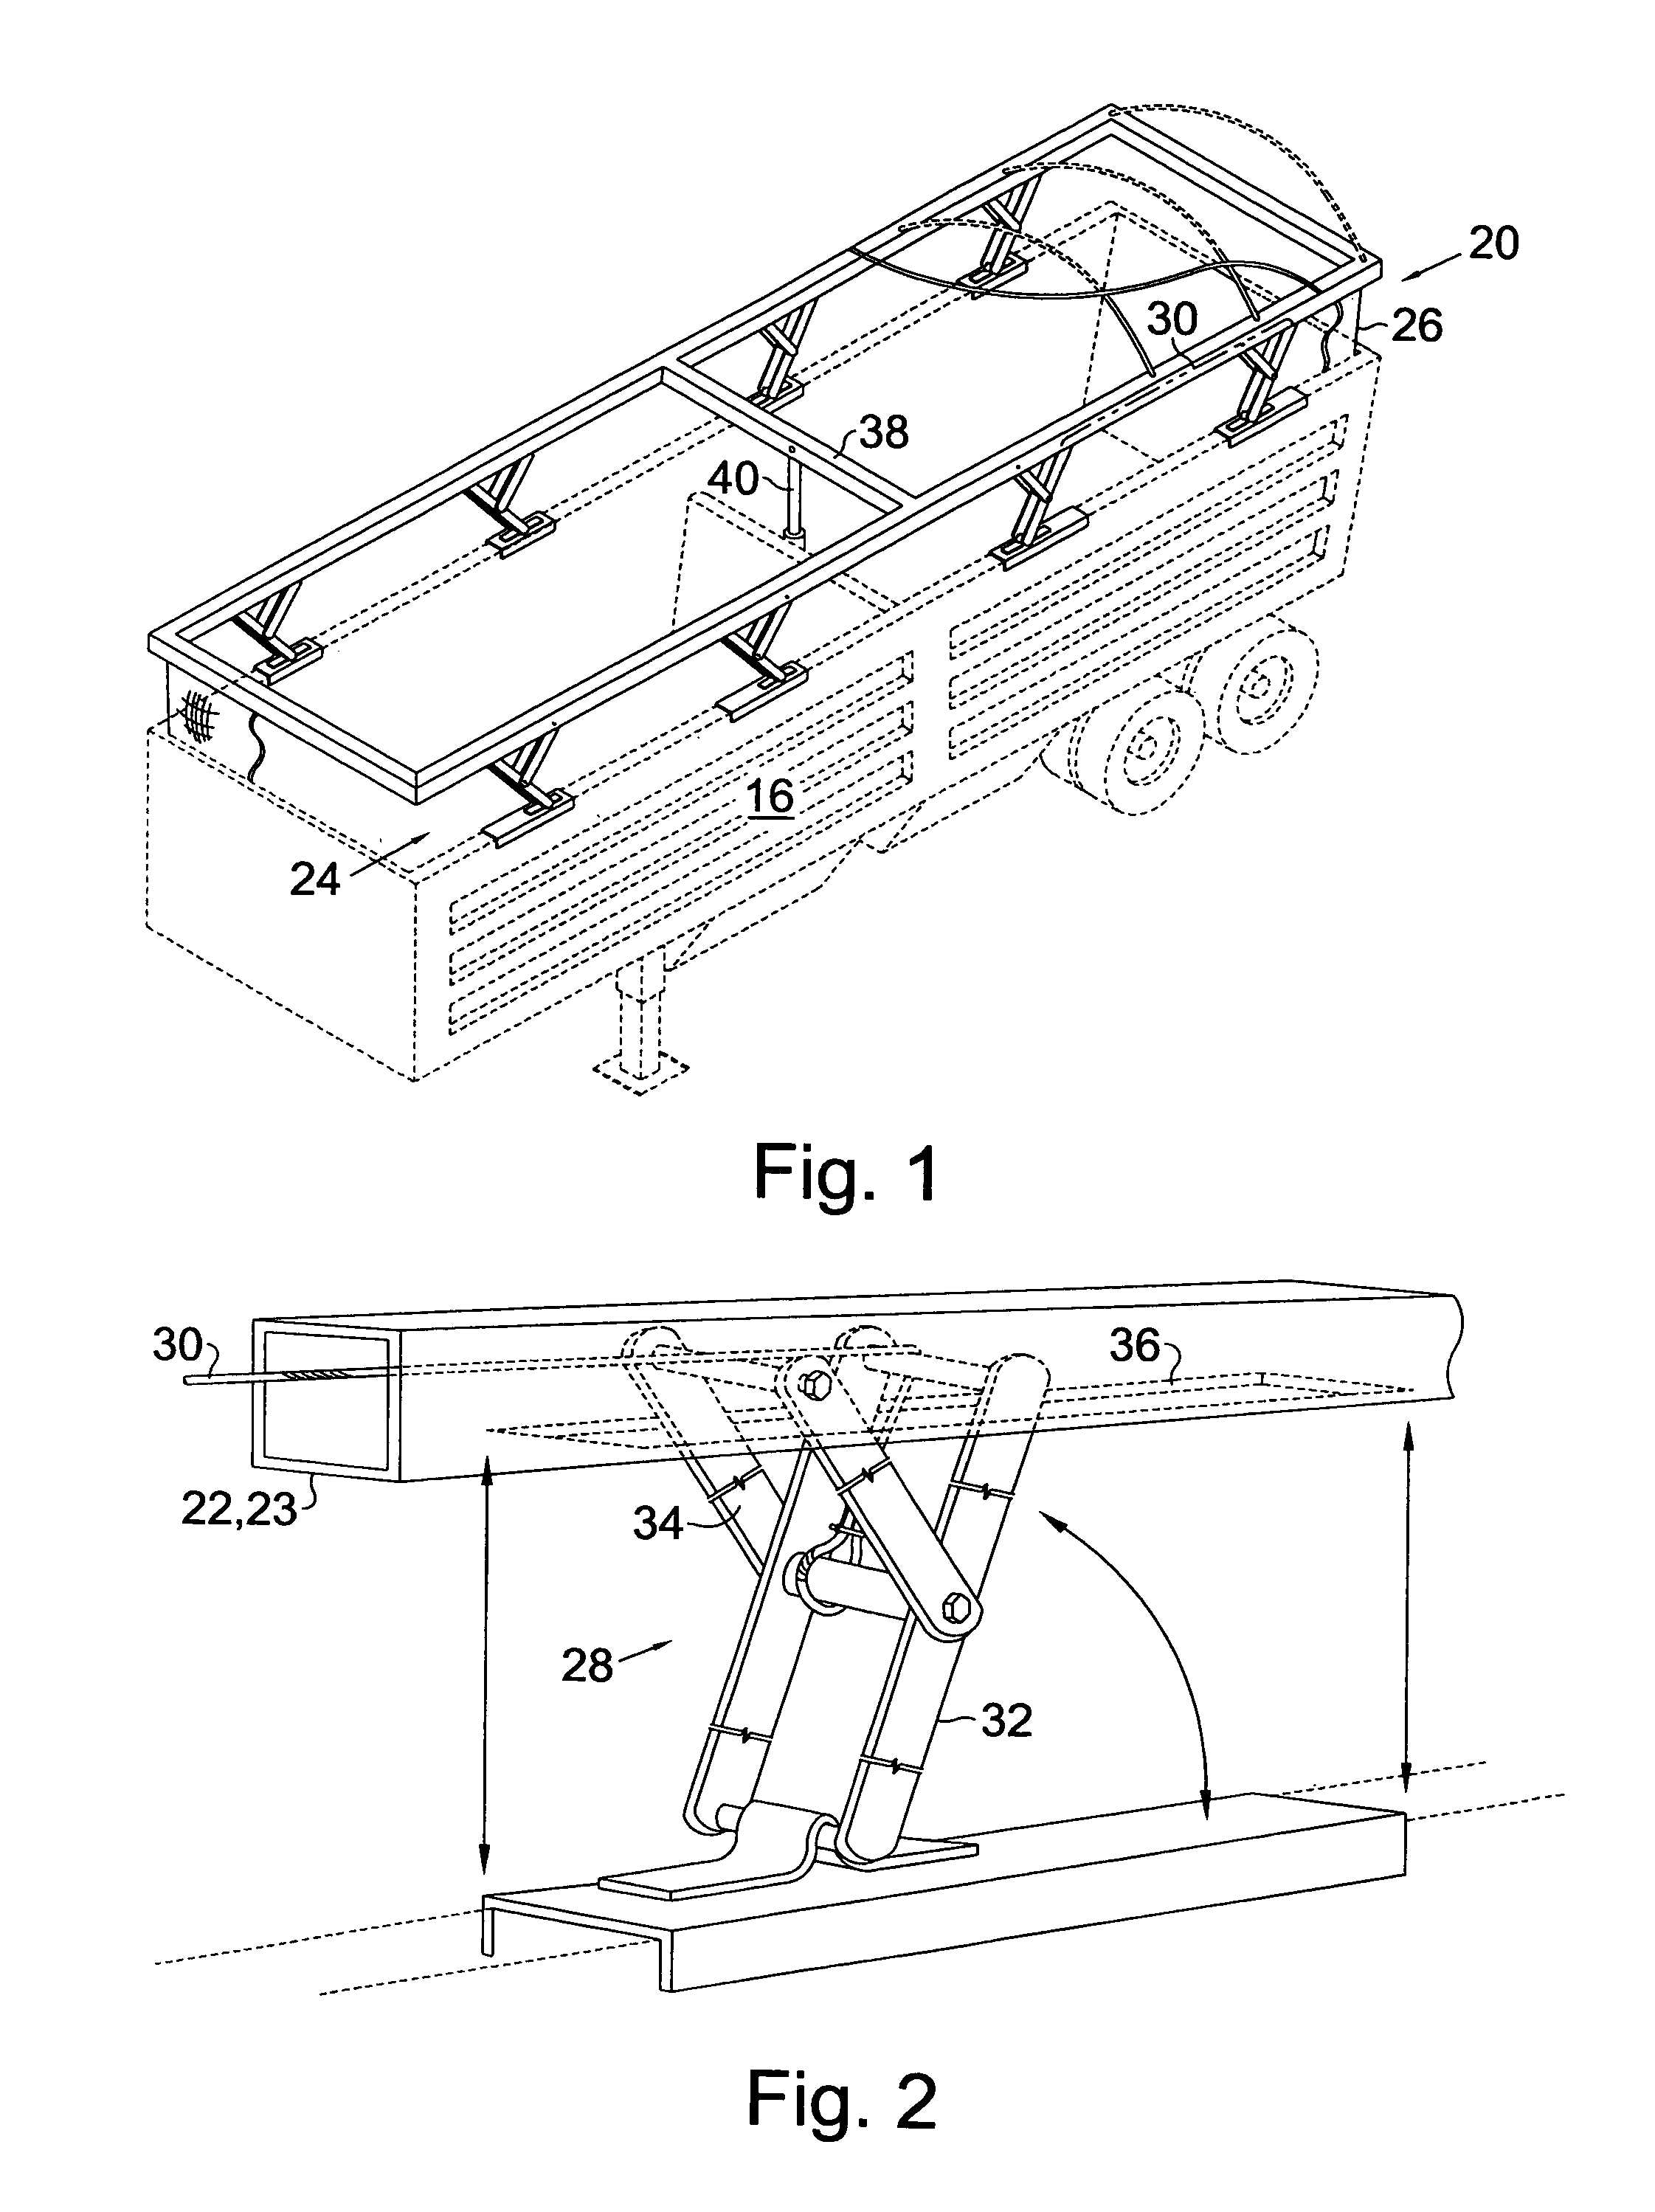 Flexible and stiff wall extension for an open load hauling box on a truck